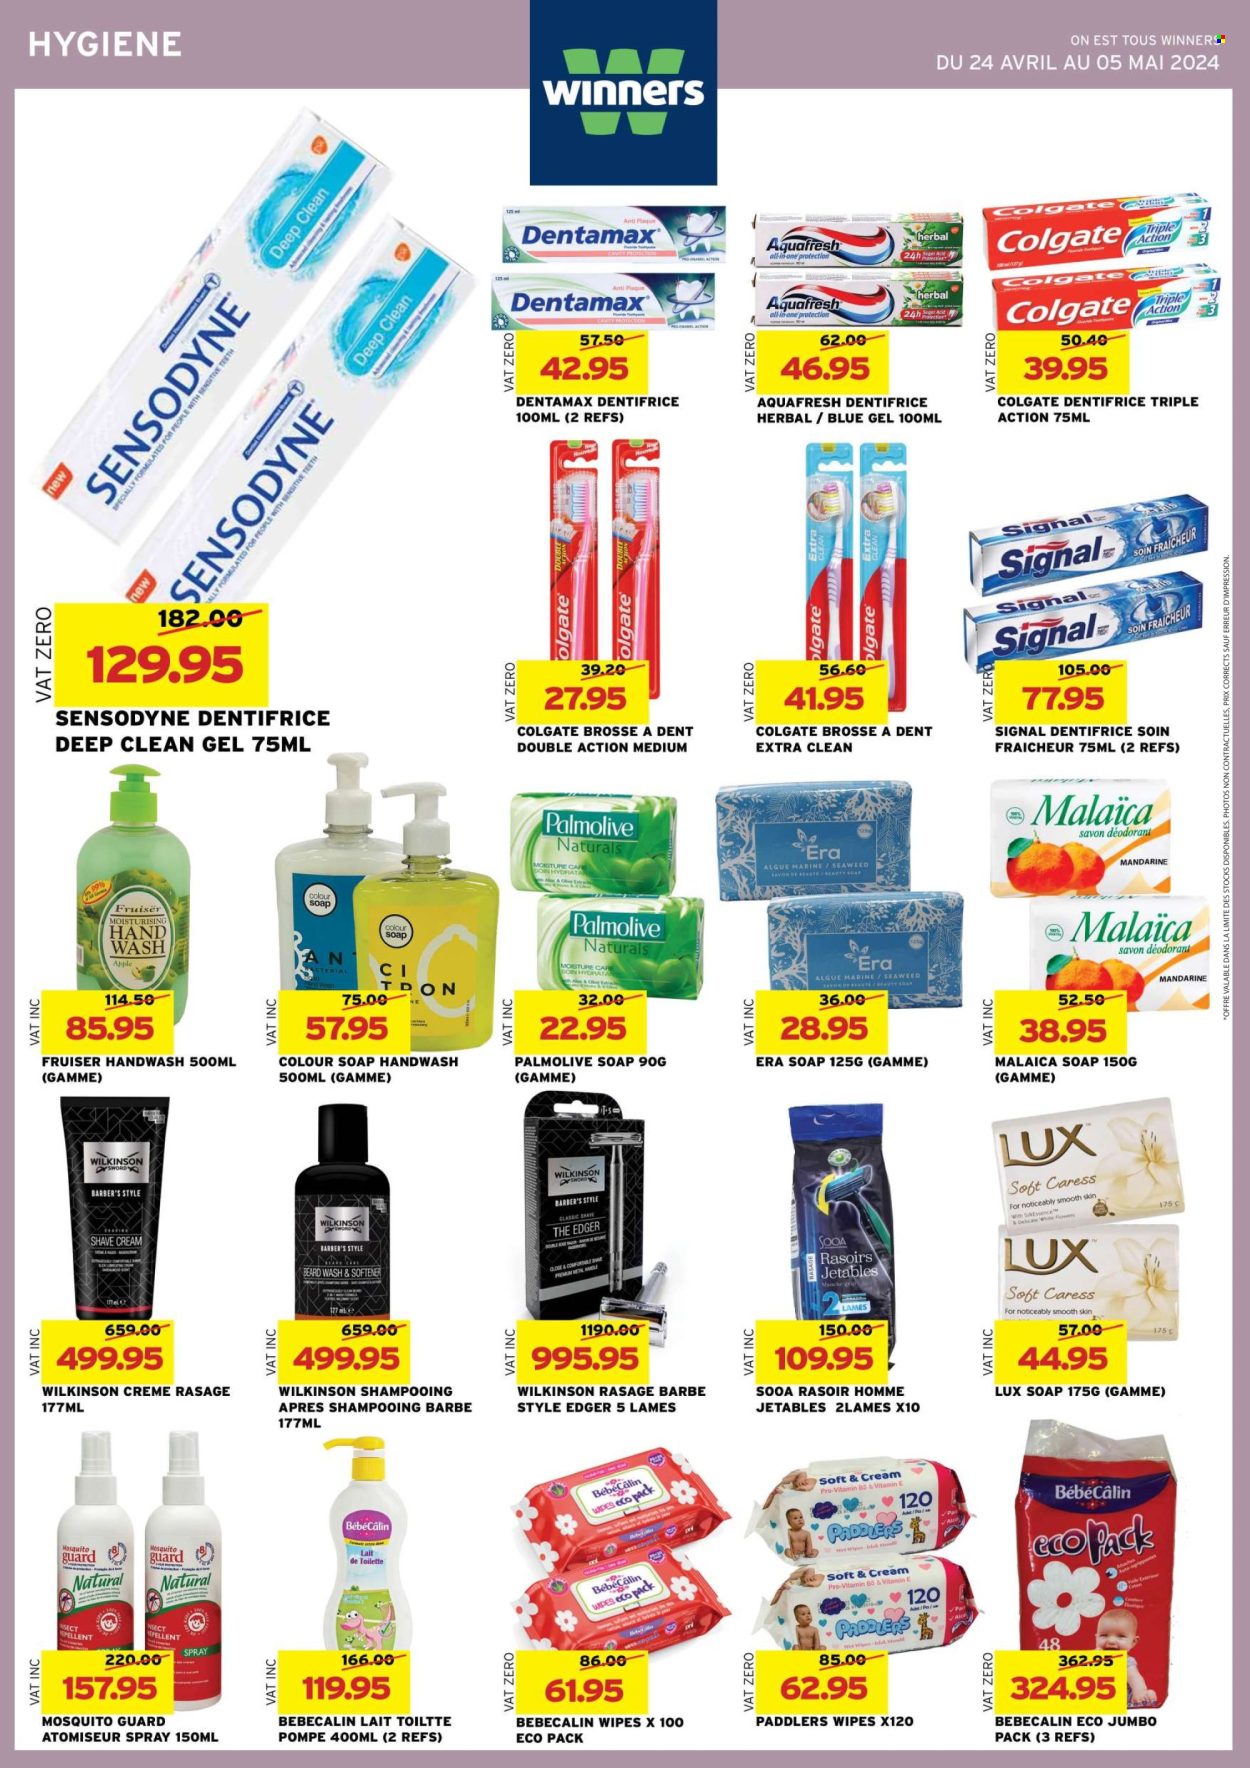 thumbnail - Winner's Catalogue - 24.04.2024 - 5.05.2024 - Sales products - sugar, seaweed, wipes, fabric softener, Lux, hand soap, hand wash, Palmolive, soap, Signal, deodorant, shave cream, Colgate, Sensodyne. Page 34.